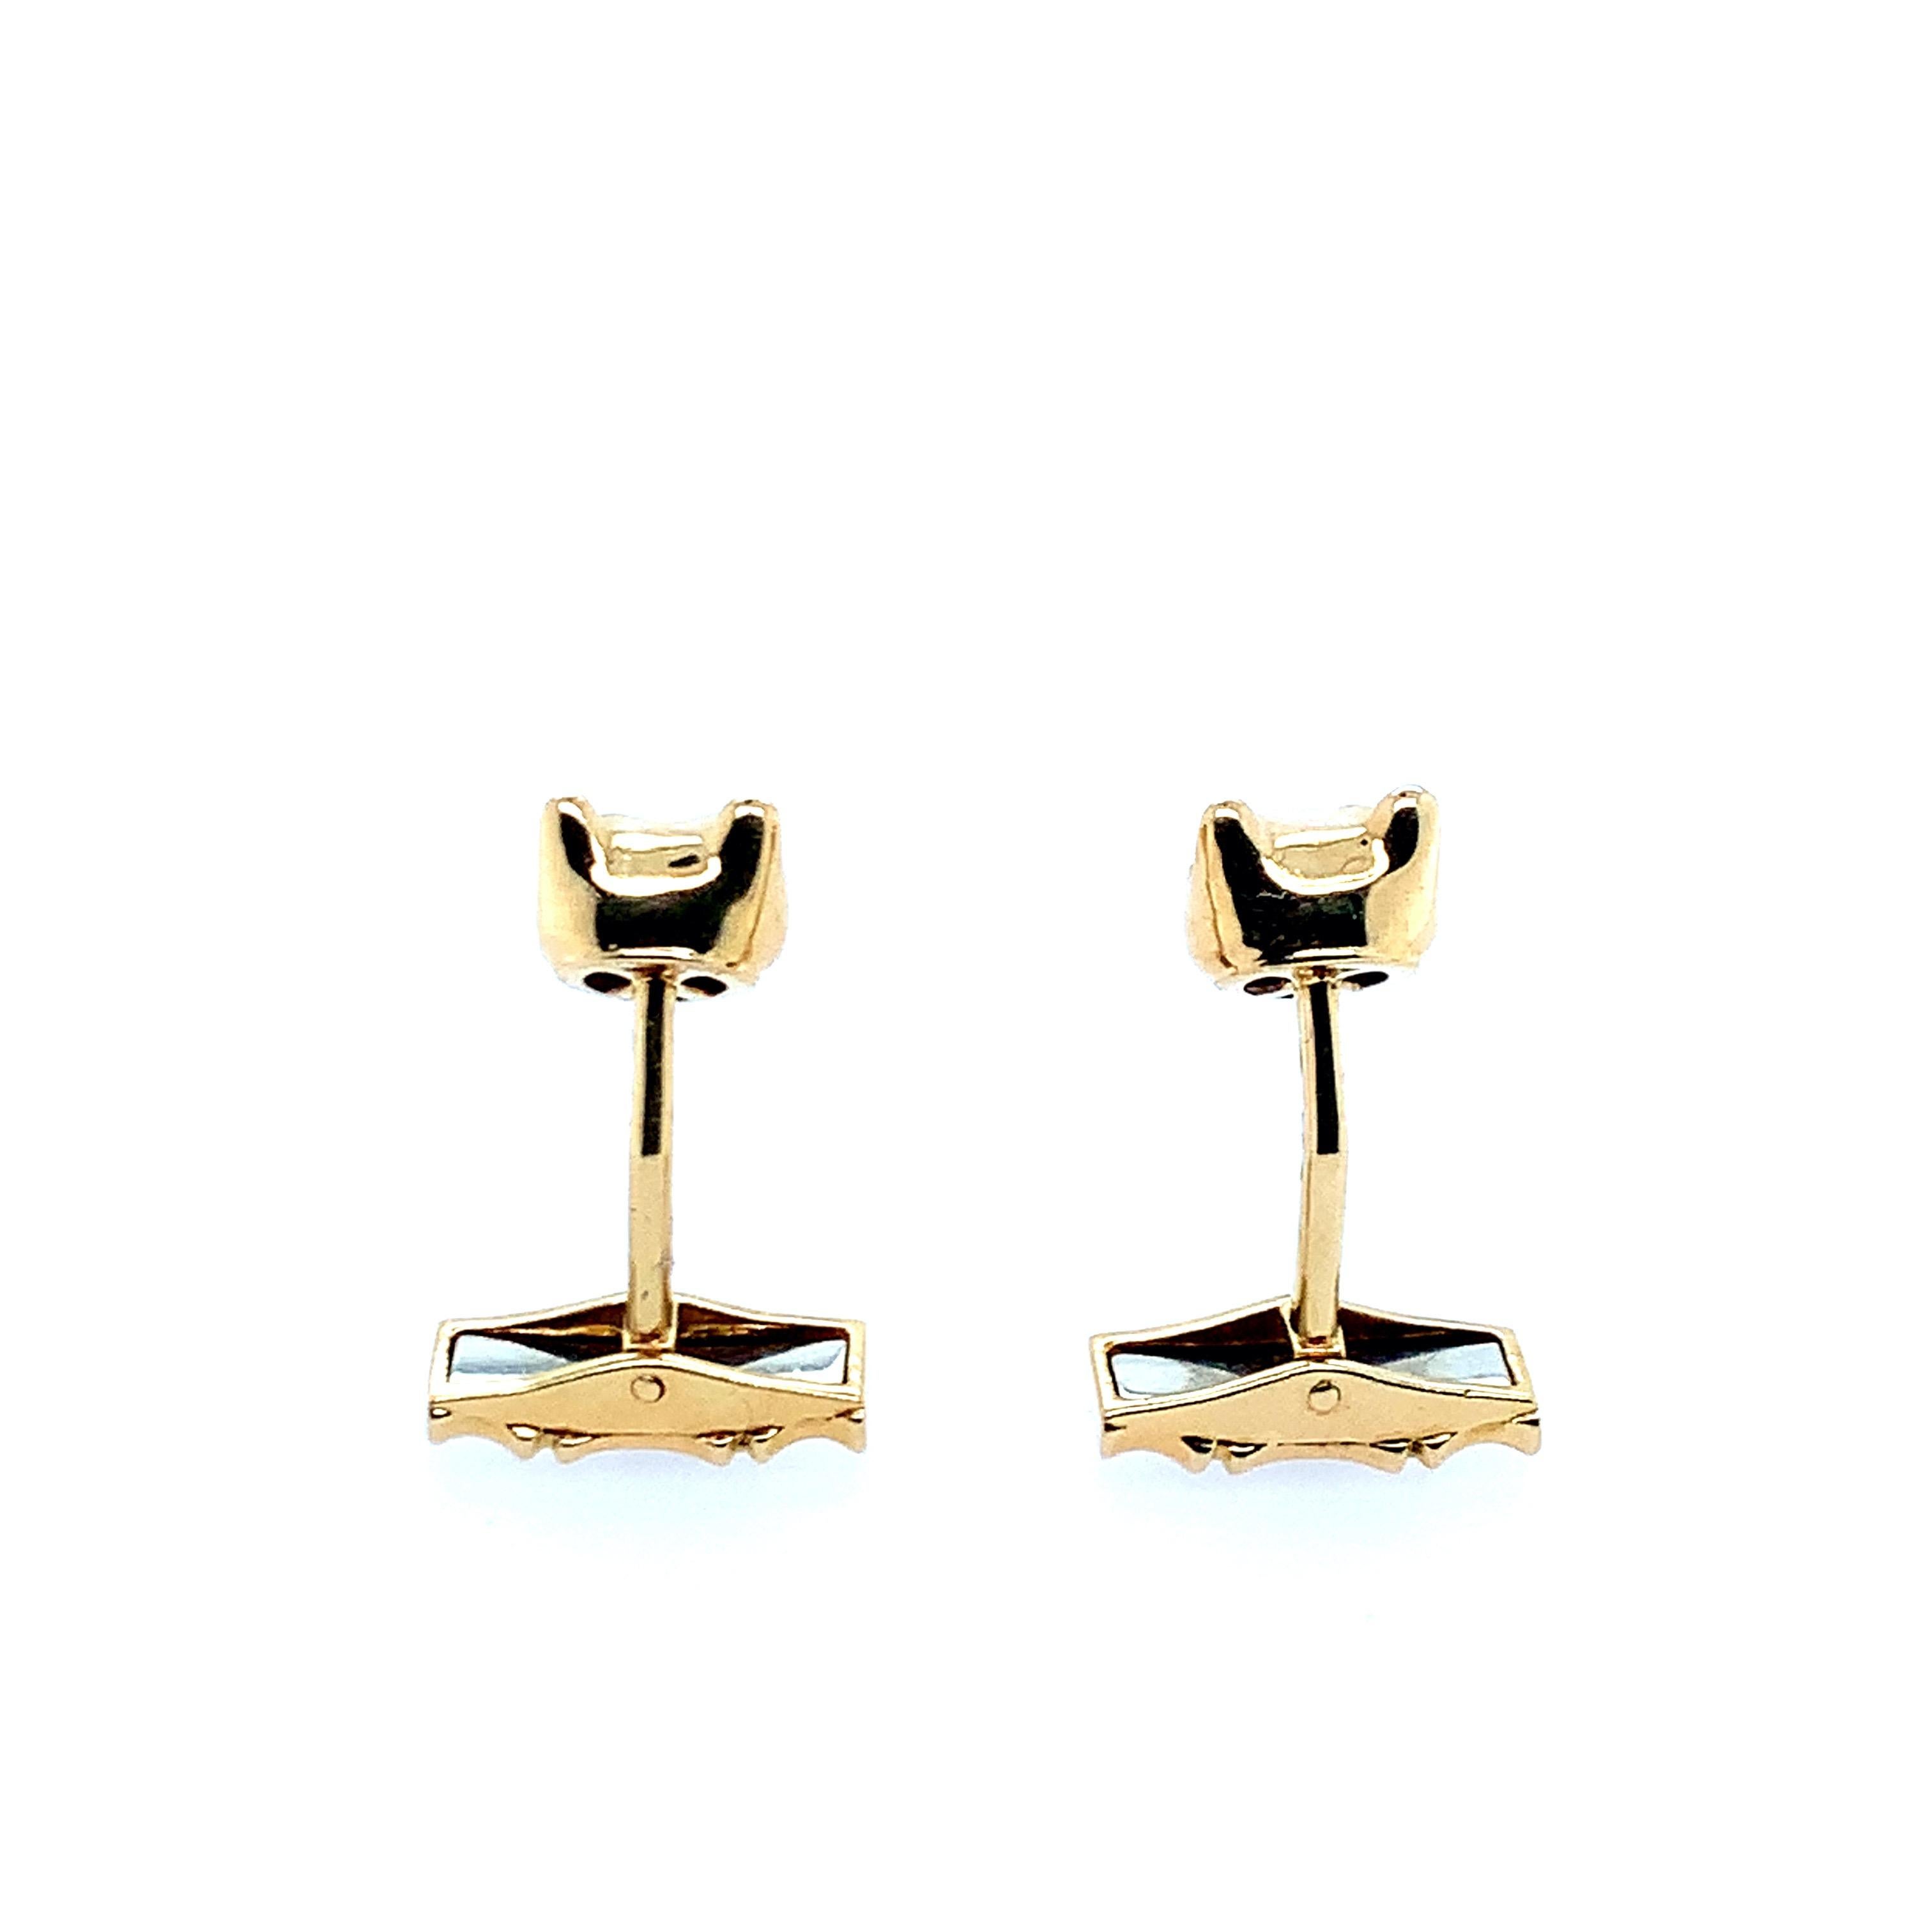 A classic Cartier motif, this panthére 18 karat gold cufflinks have emeralds for eyes and onyx for nose. Total weight: 13.0 grams. Length: 2.5 cm.

Serial No. 701678